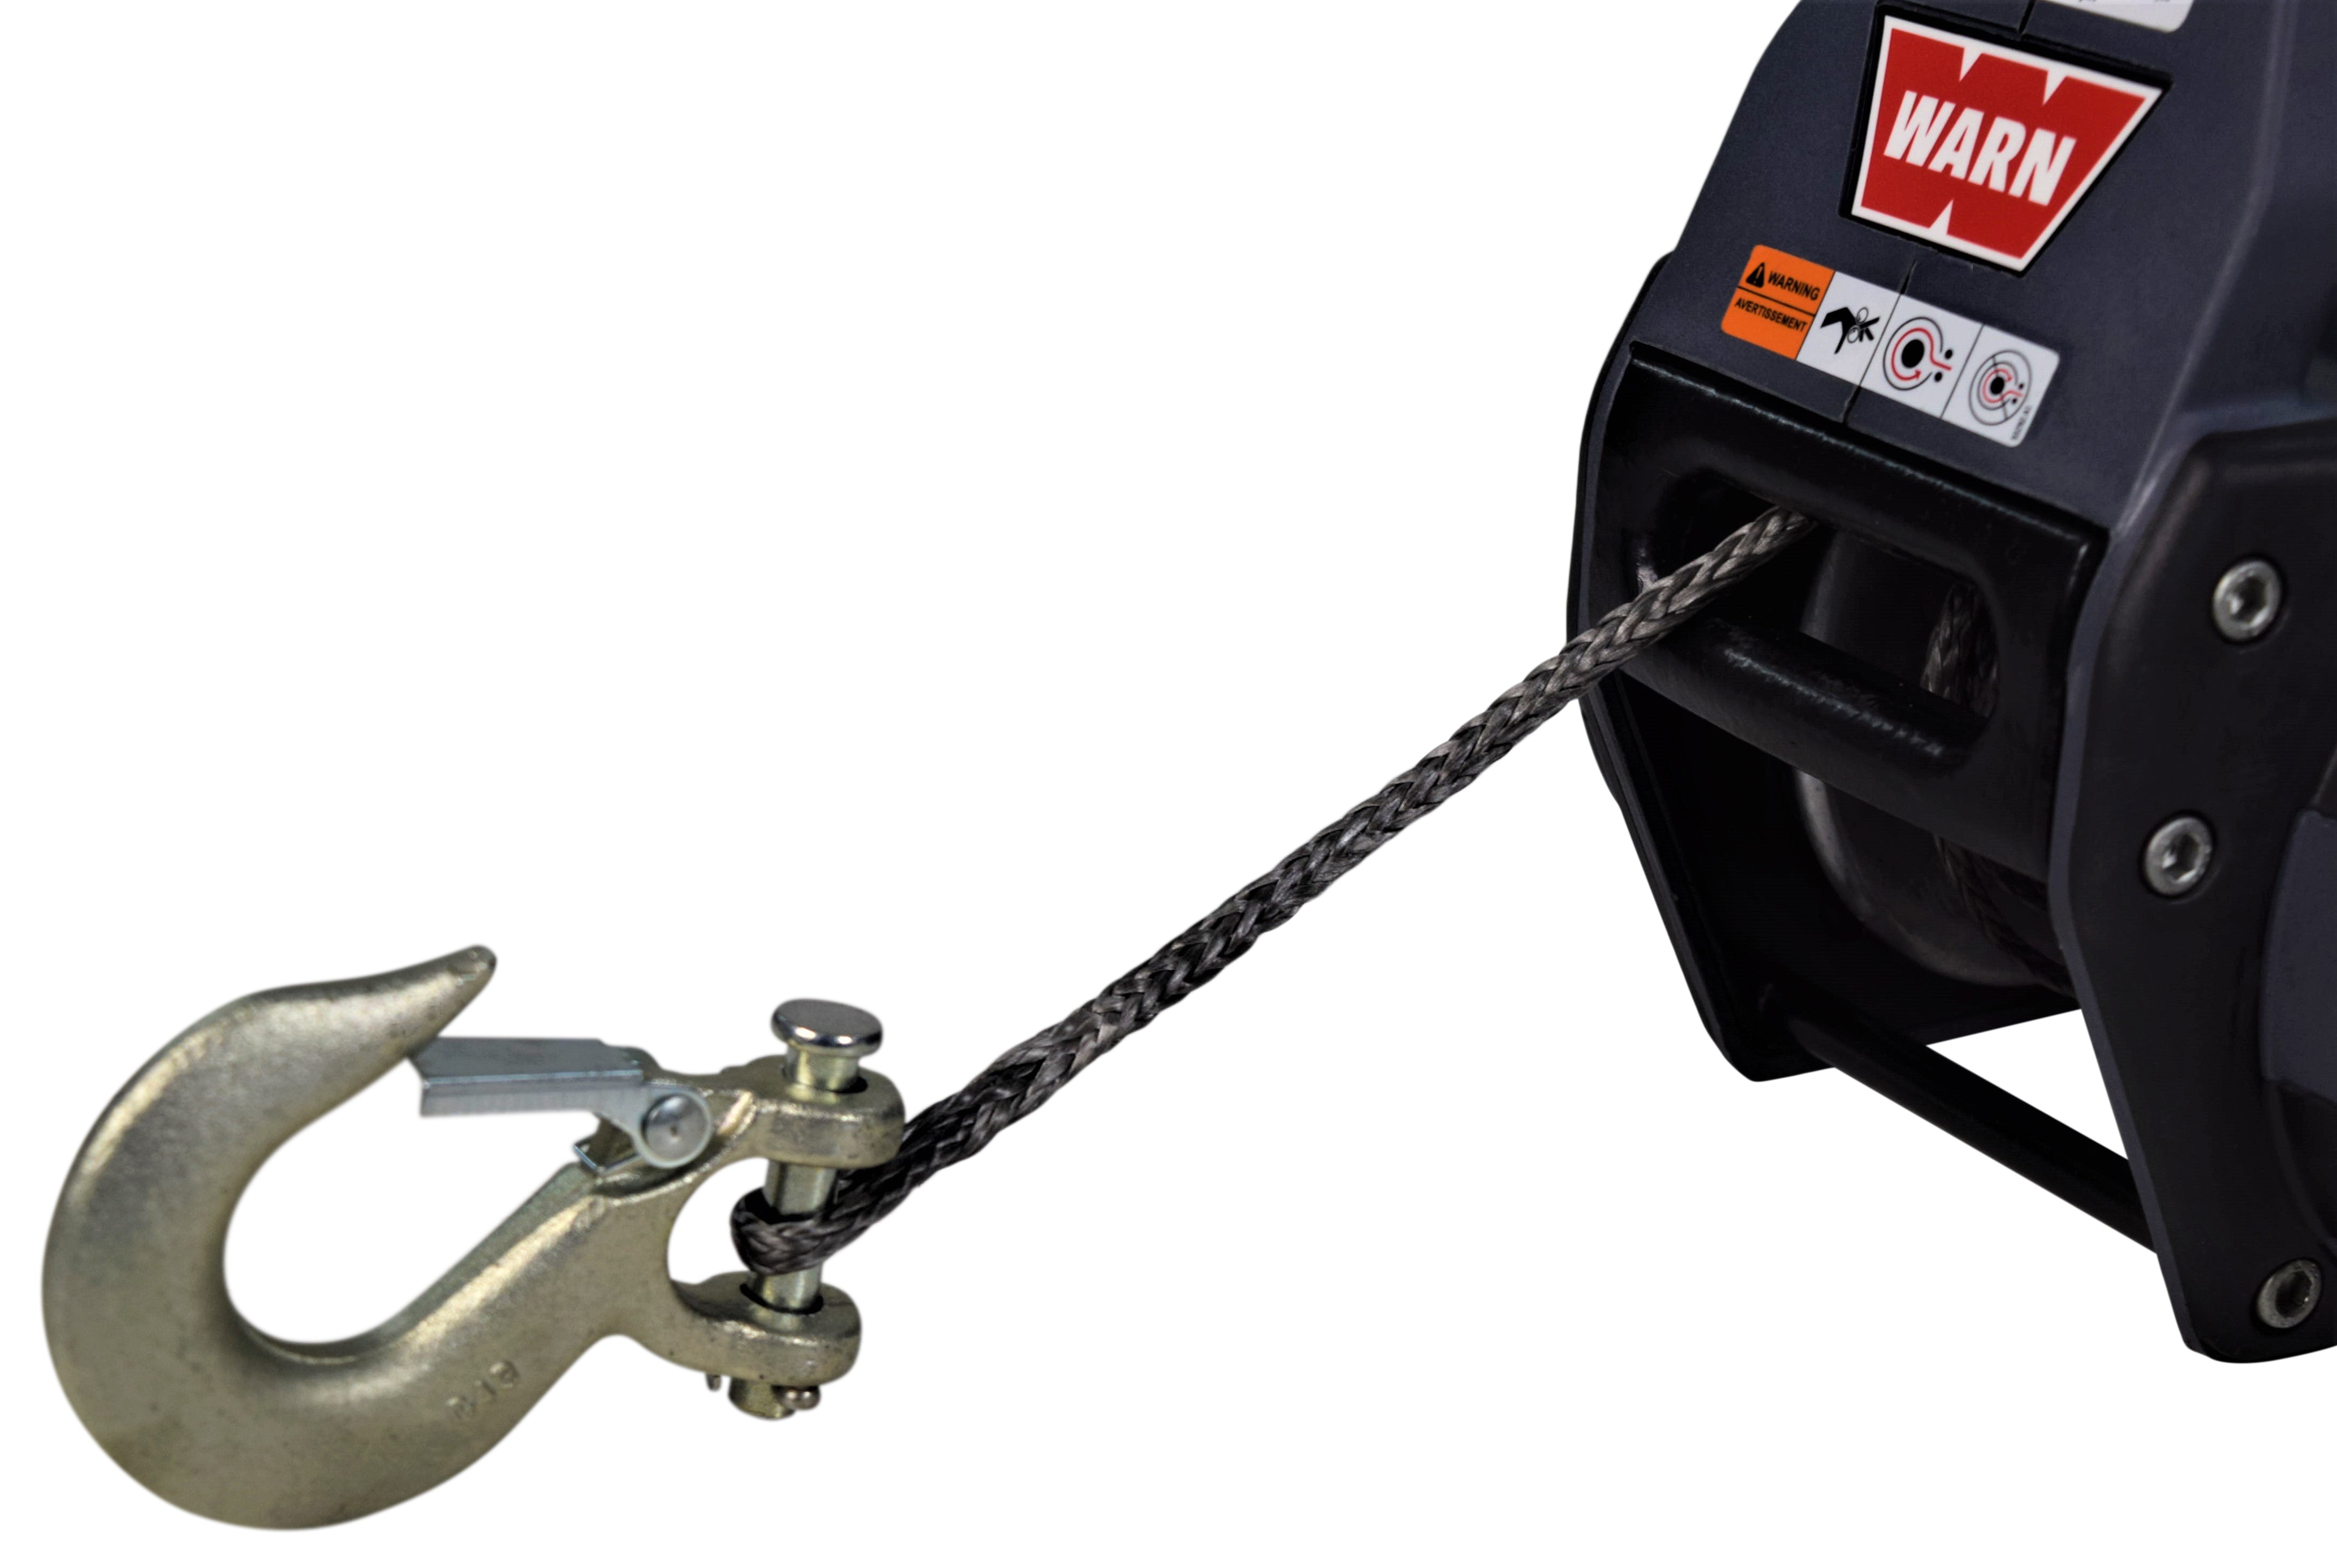 Warn 101575 Drill Winch 750 lbs Capacity 40' Synthetic Rope Free-spool Clutch